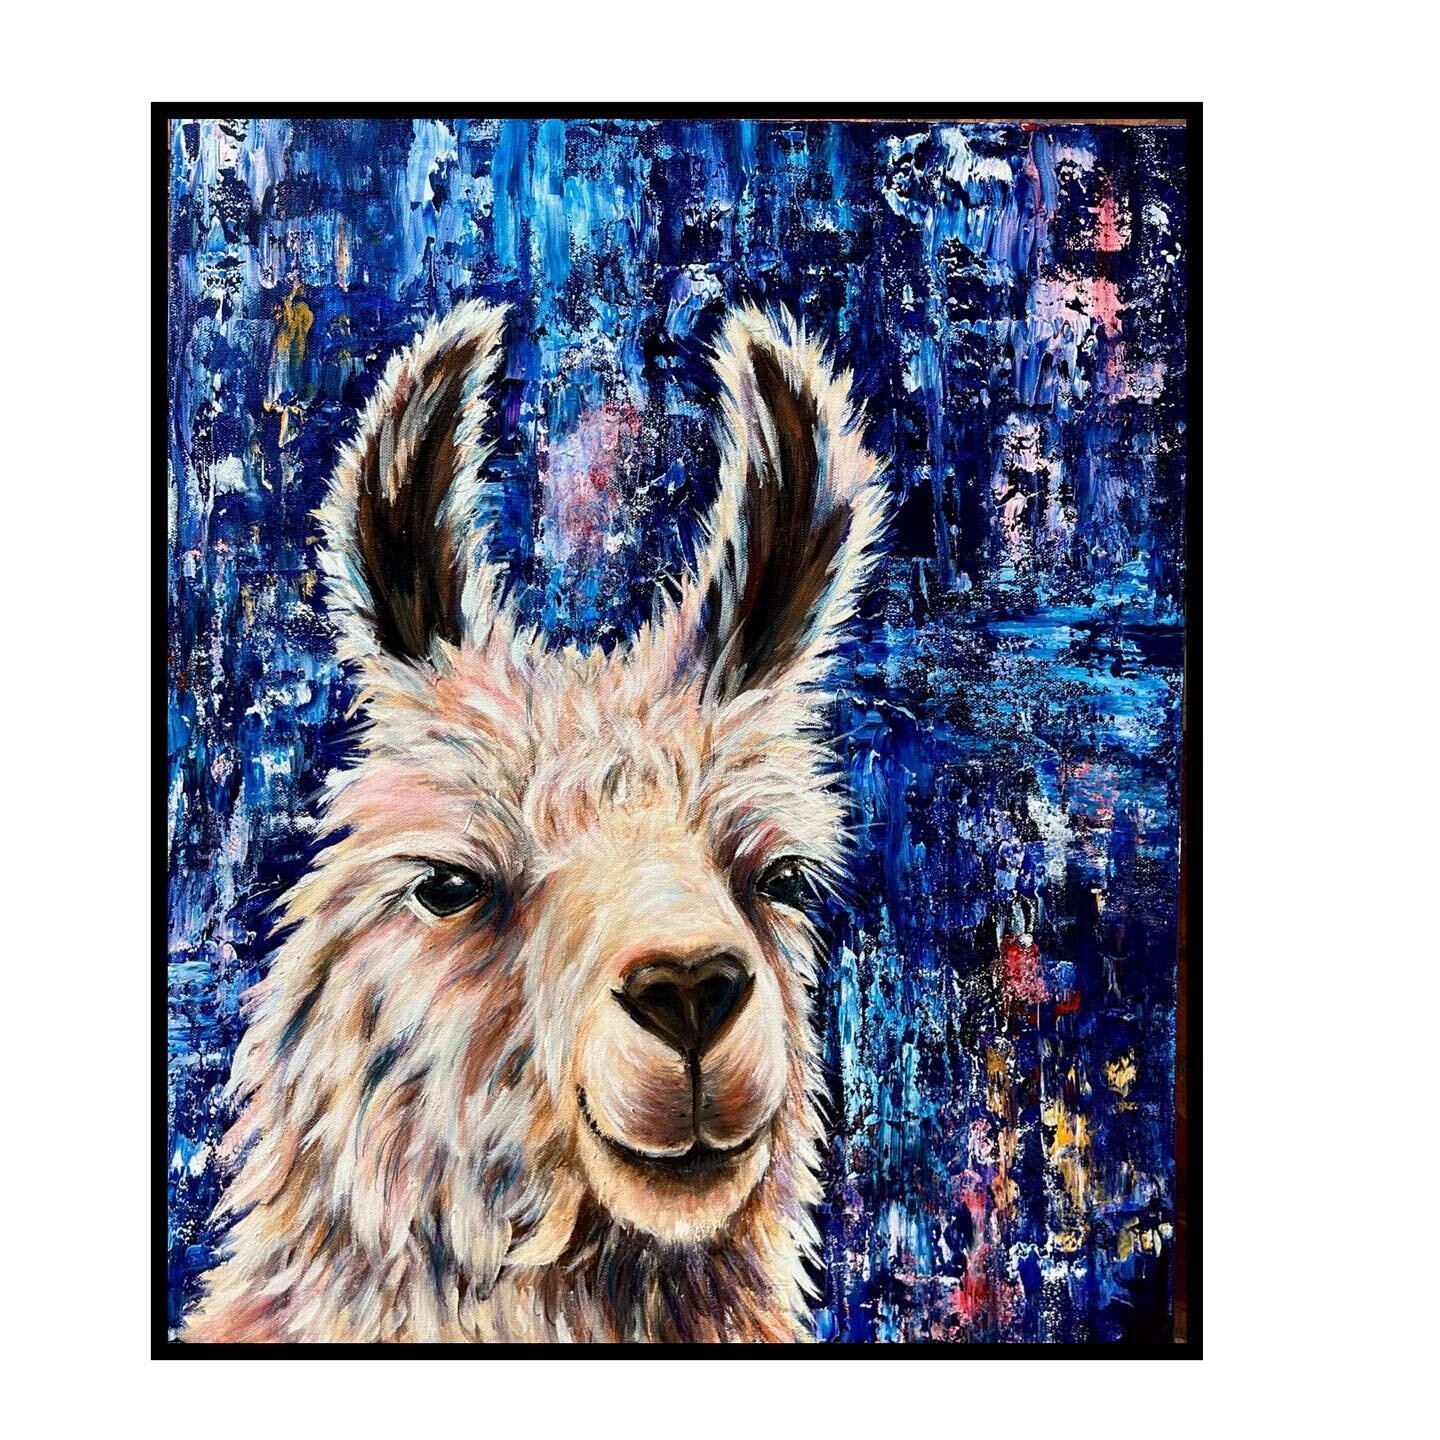 Larry the Llama is 16&rdquo; x 20&rdquo;, acrylic and unframed right now. 

He&rsquo;ll join his friends at @wildharegallery this week. 

Not gonna lie, Larry gave me fits. It was a struggle till the very end. And even the I just said I give up! 😁

